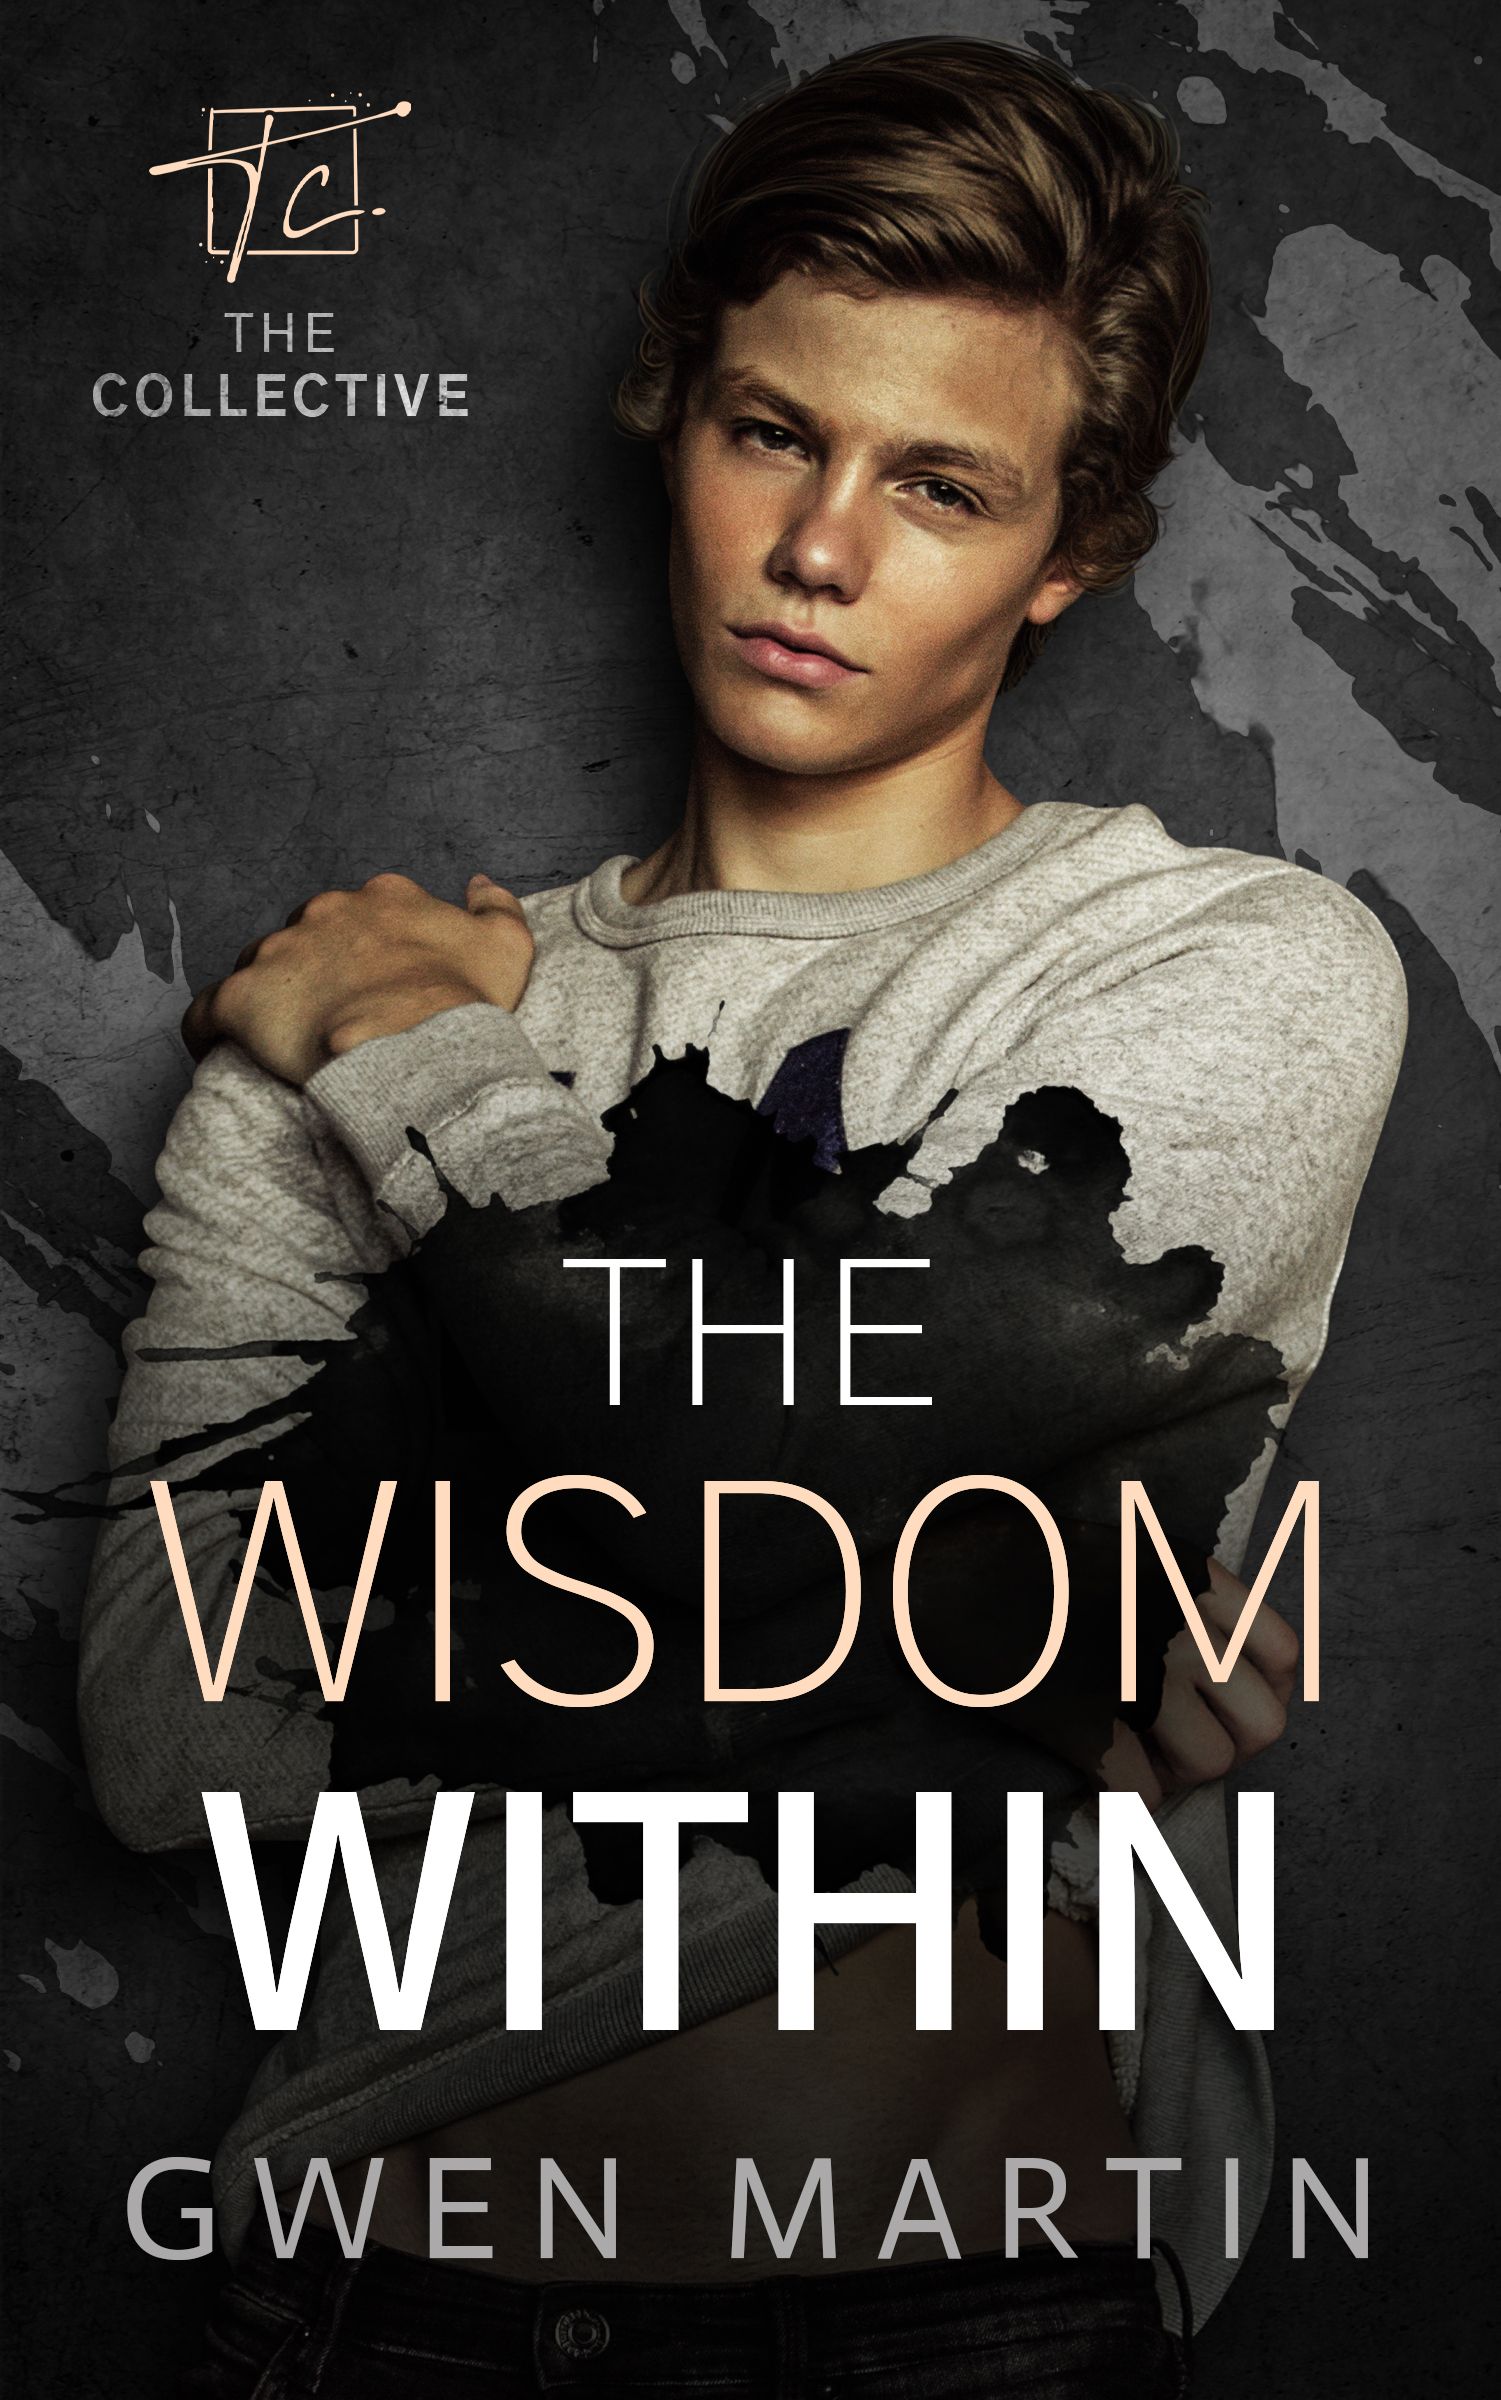 A book called The Wisdom Within by Gwen Martin.